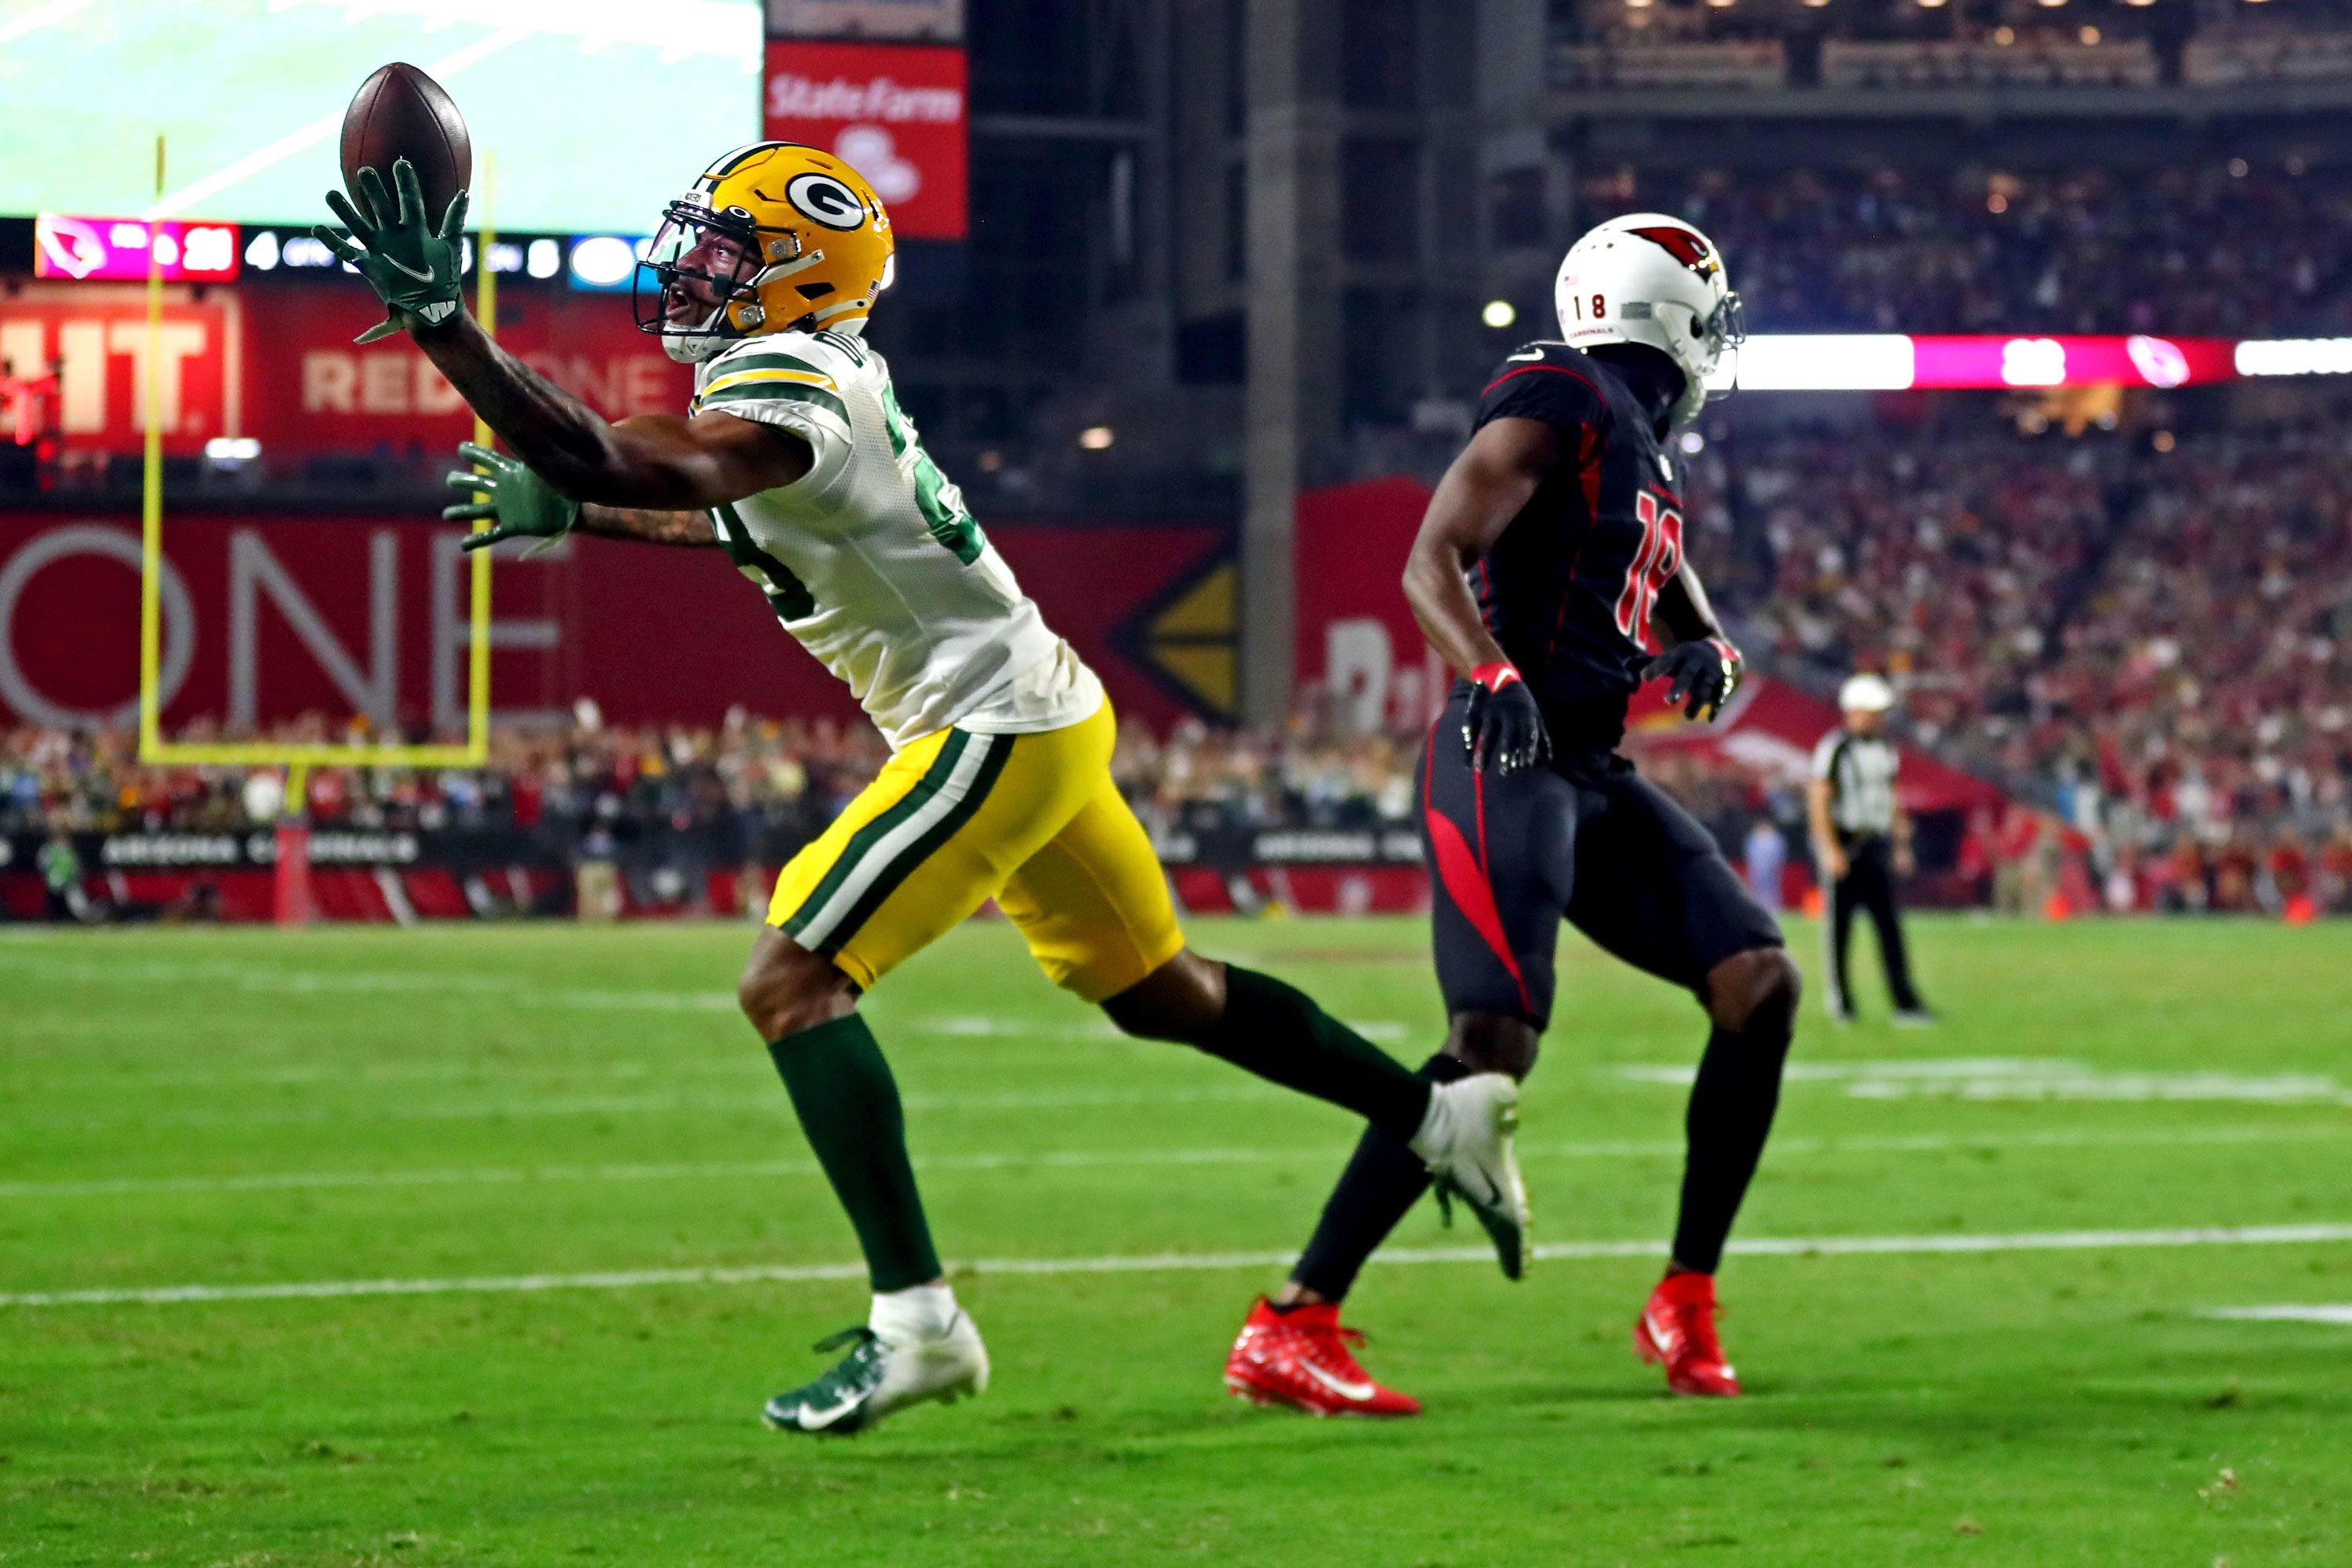 Cardinals vs Packers: No more undefeated teams in NFL as Arizona